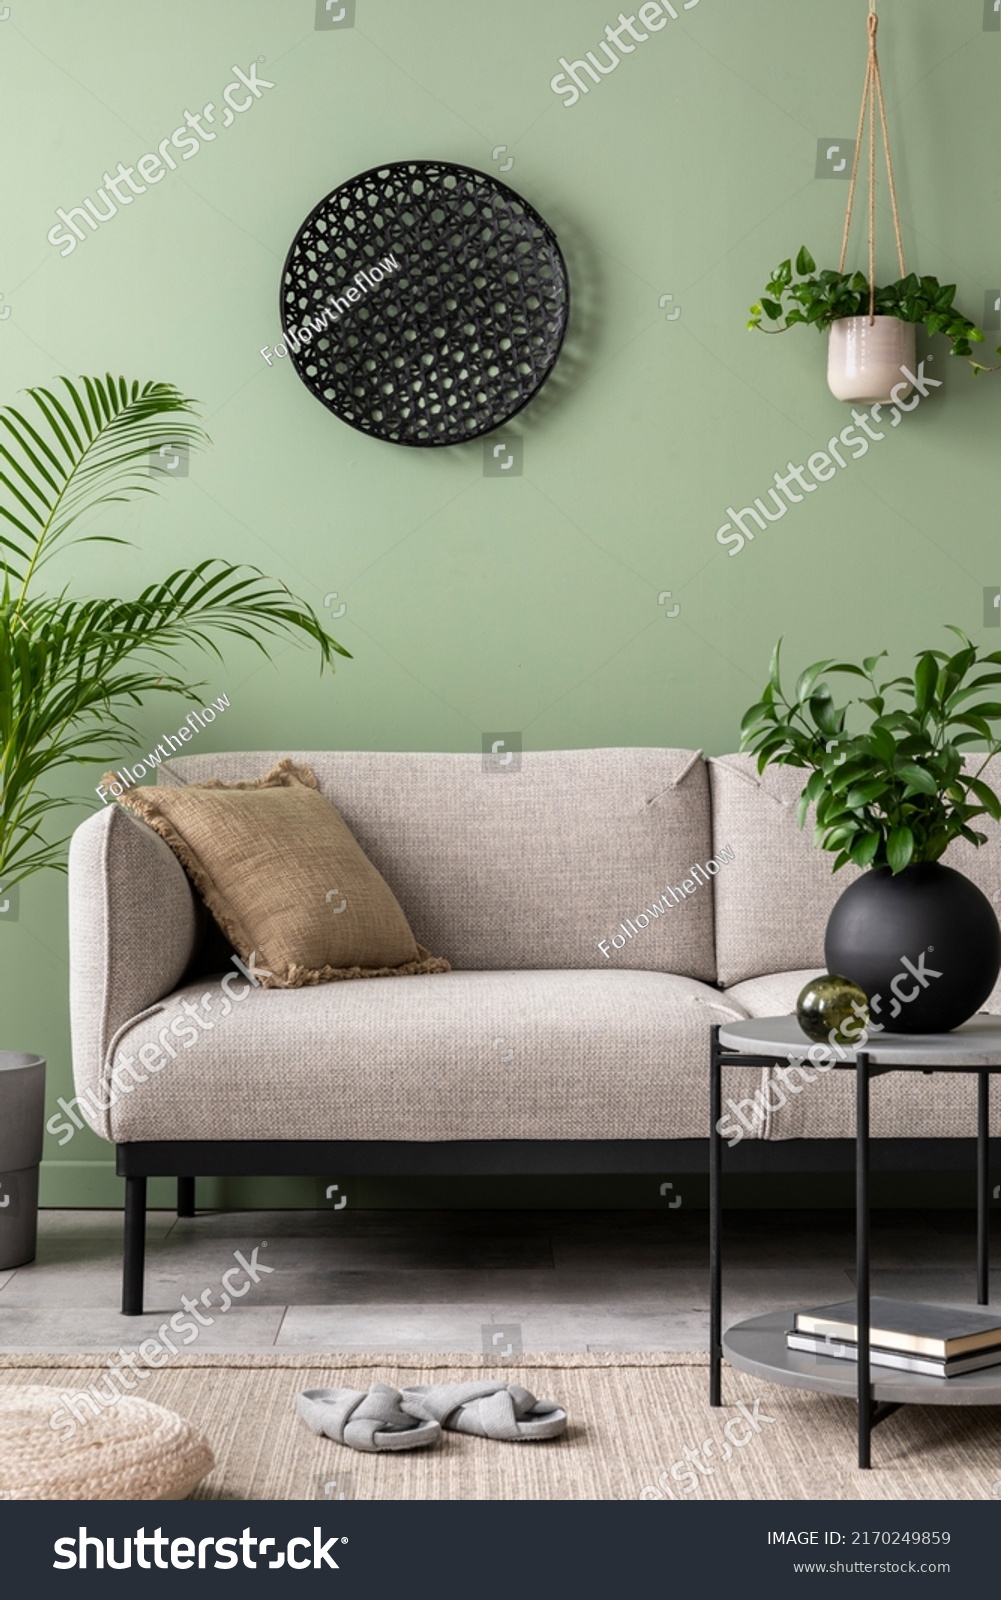 The stylish composition at living room interior with green wall, design gray sofa, coffee table, dark ornament and elegant personal accessories. Beige pillow. Cozy apartment. Template. 
 #2170249859